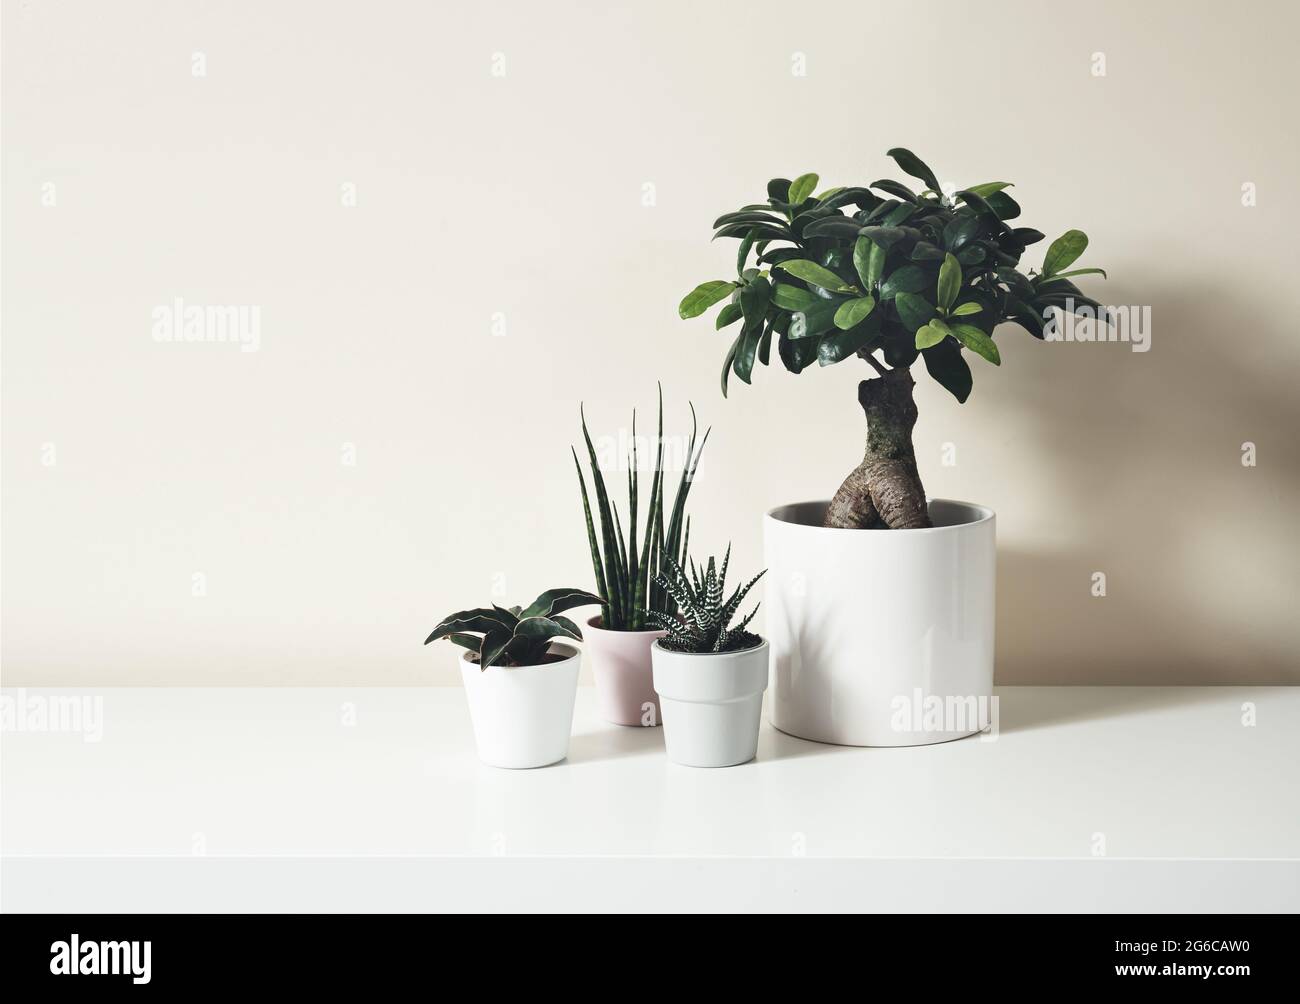 Home plants - sansevieria fernwood, sansevieria francisii, haworthia and ficus ginseng microcarpa in pots on a white background, minimalistic home dec Stock Photo